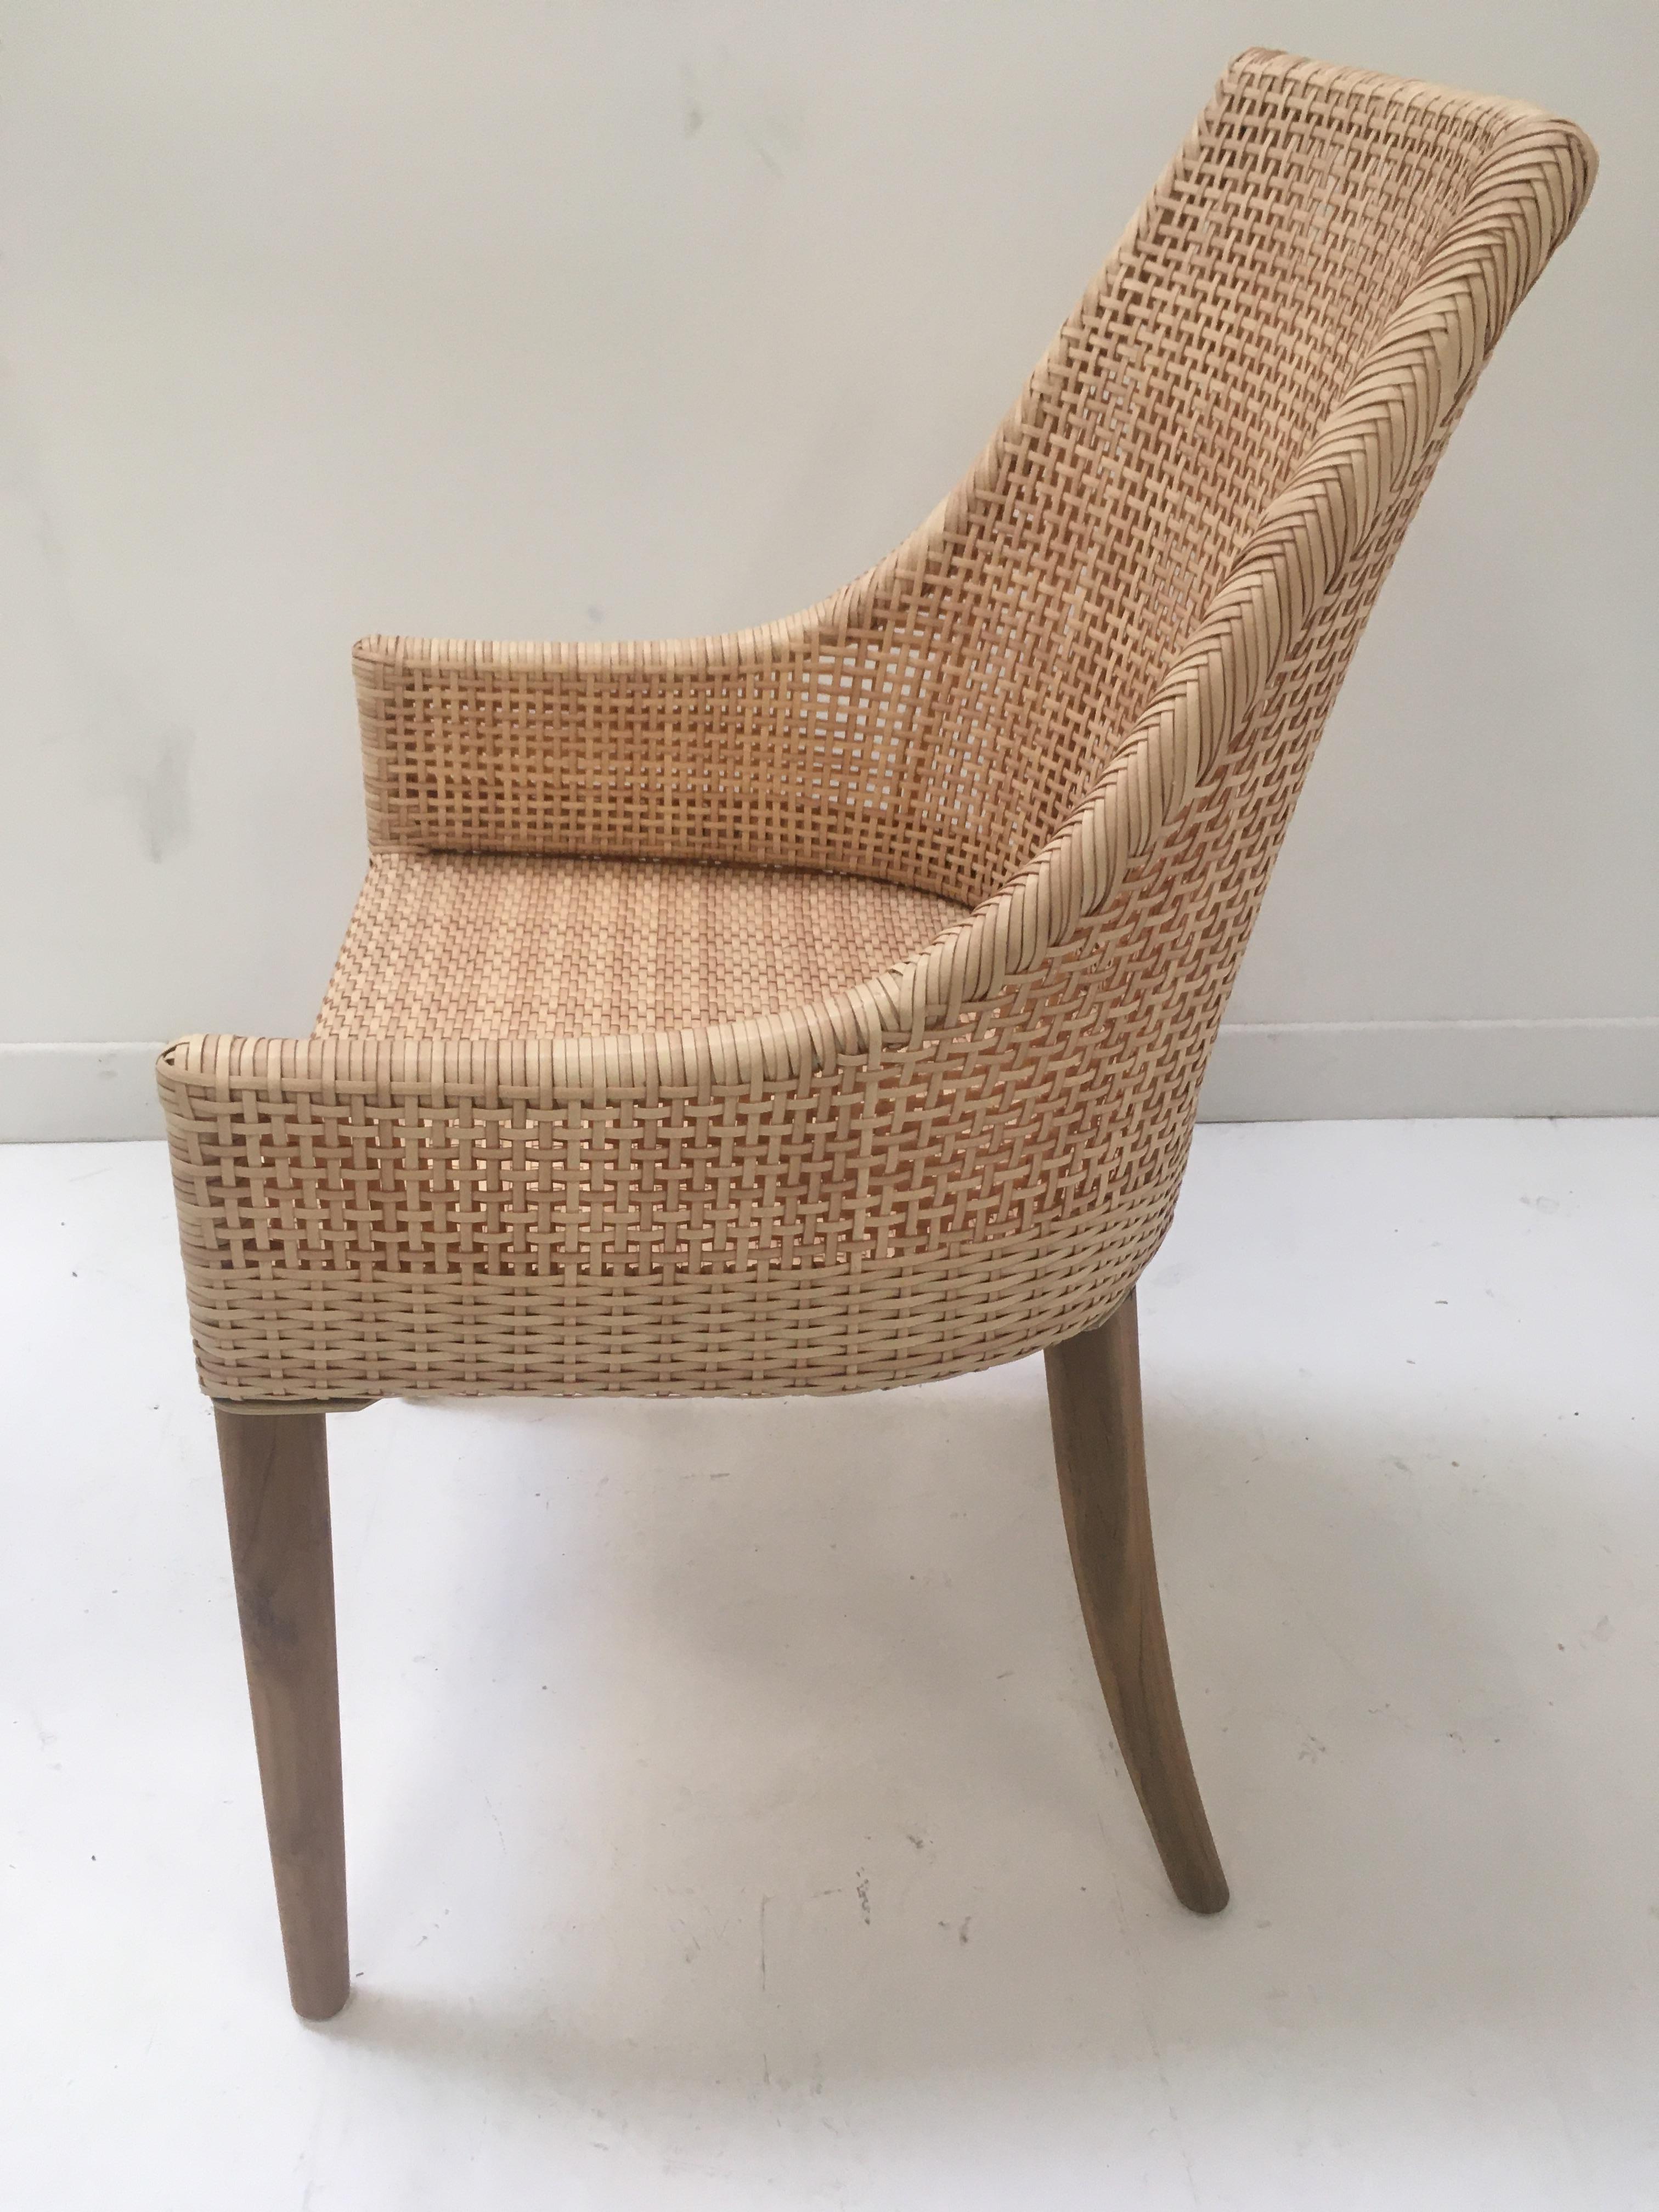 Elegant outdoor chair with solid teak wood feet and braided resin rattan effect seat, combining quality, robustness and class. Perfect on your terrace, in your veranda, your winter garden, around the outdoor dining table! In excellent condition (new